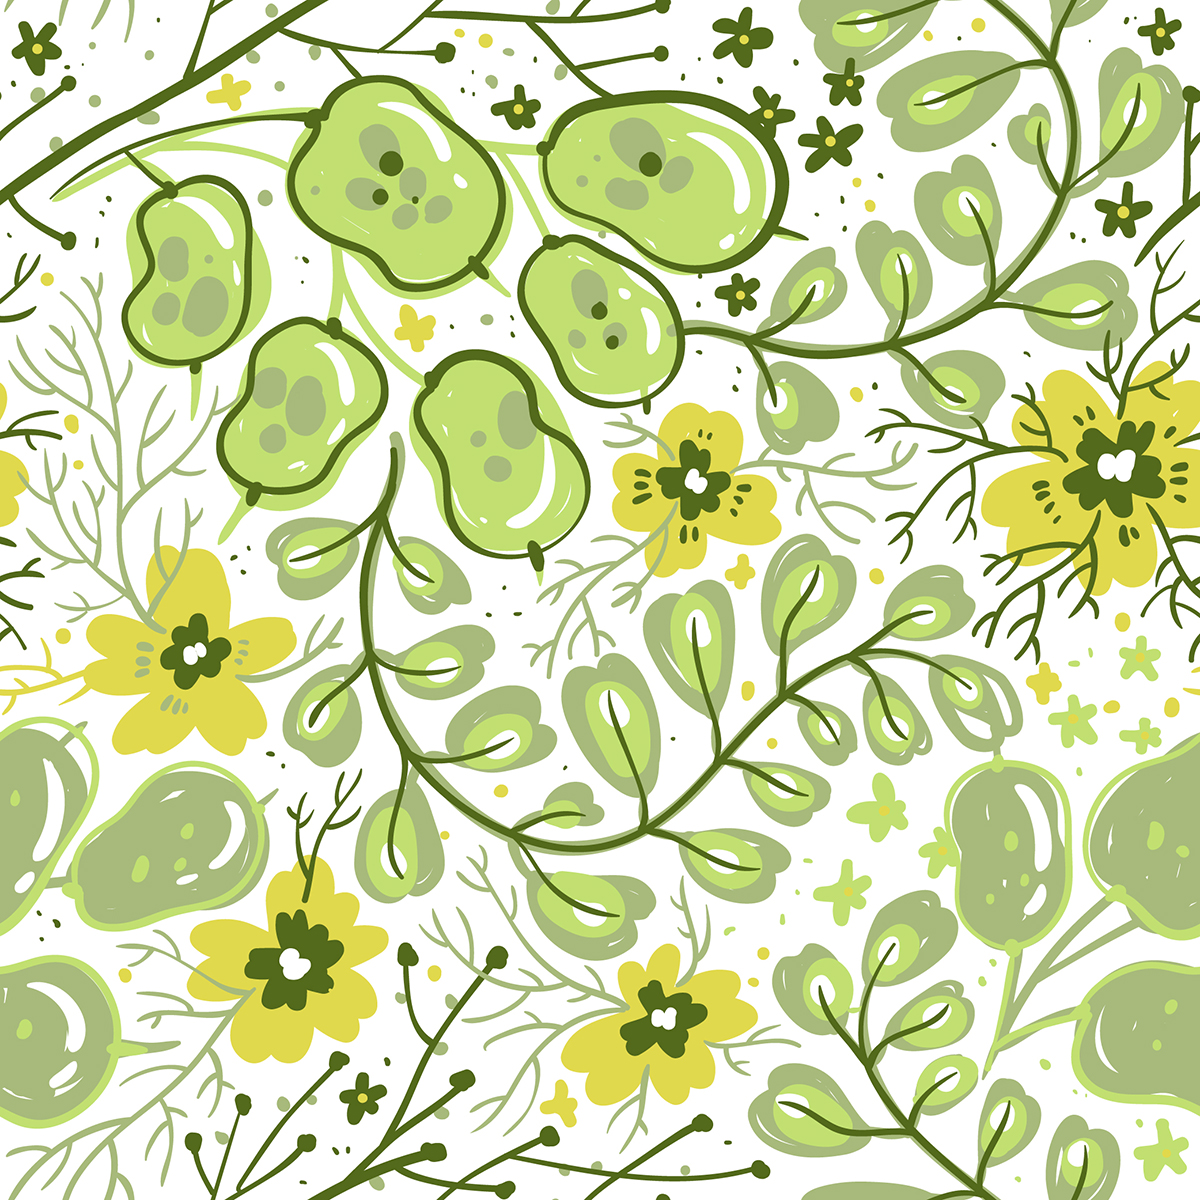 A pattern of green and yellow flowers and leaves